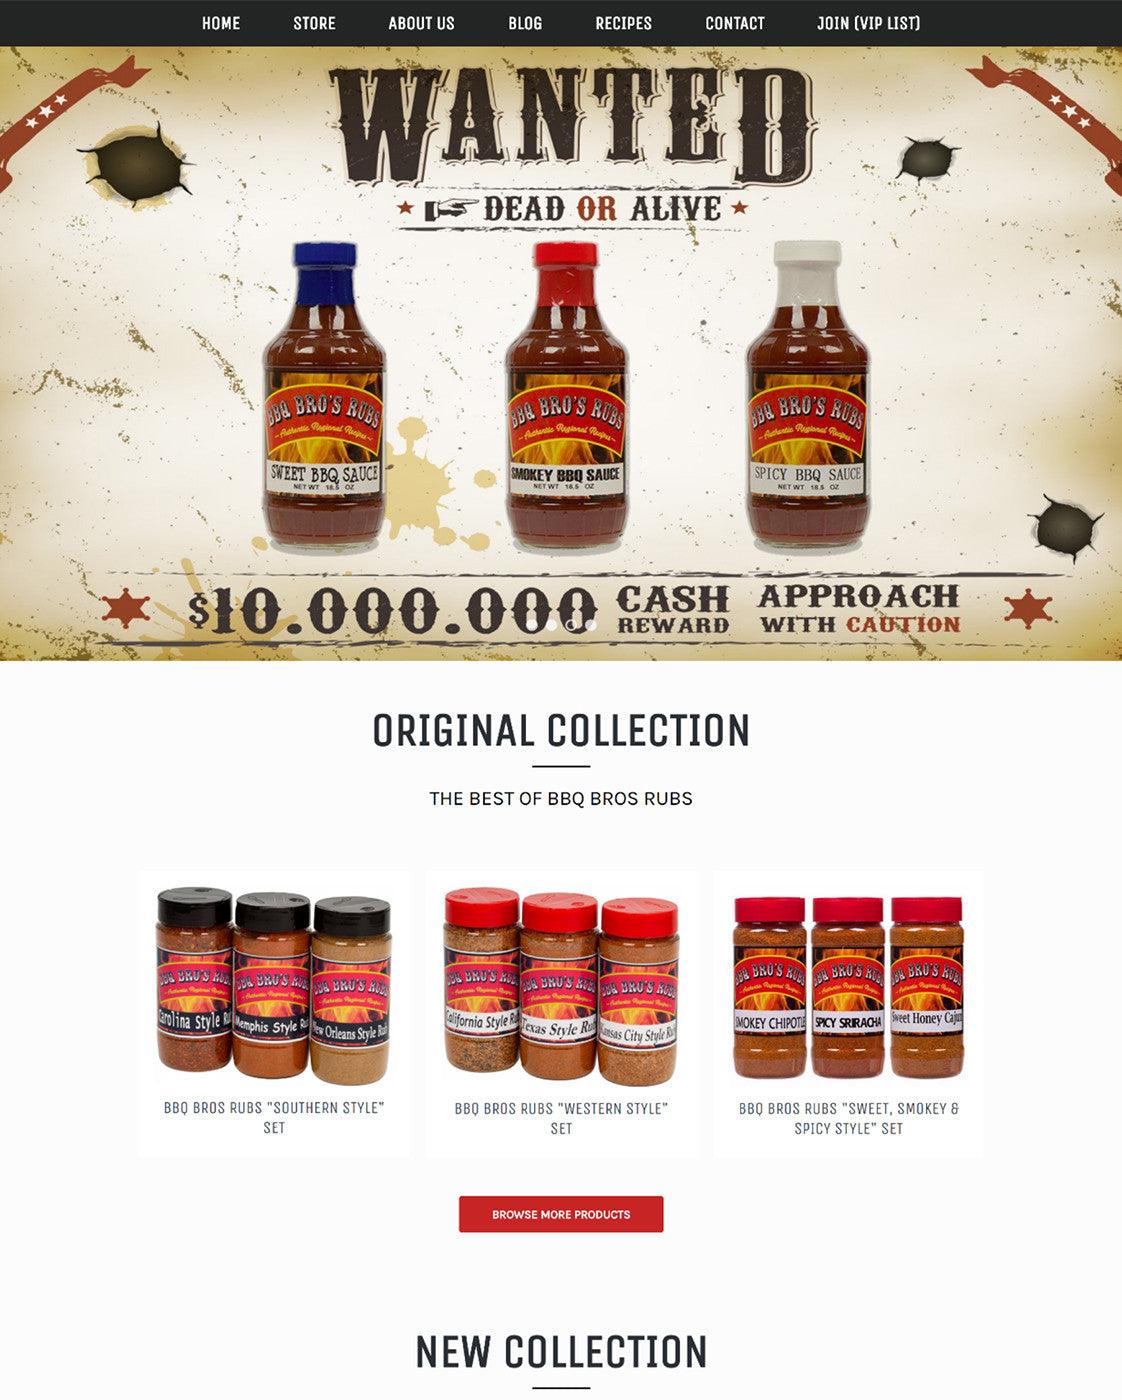 Bbq Bro Rubs - Photography and Web Design - Los Angeles, US based Shopify Experts Revo Designs